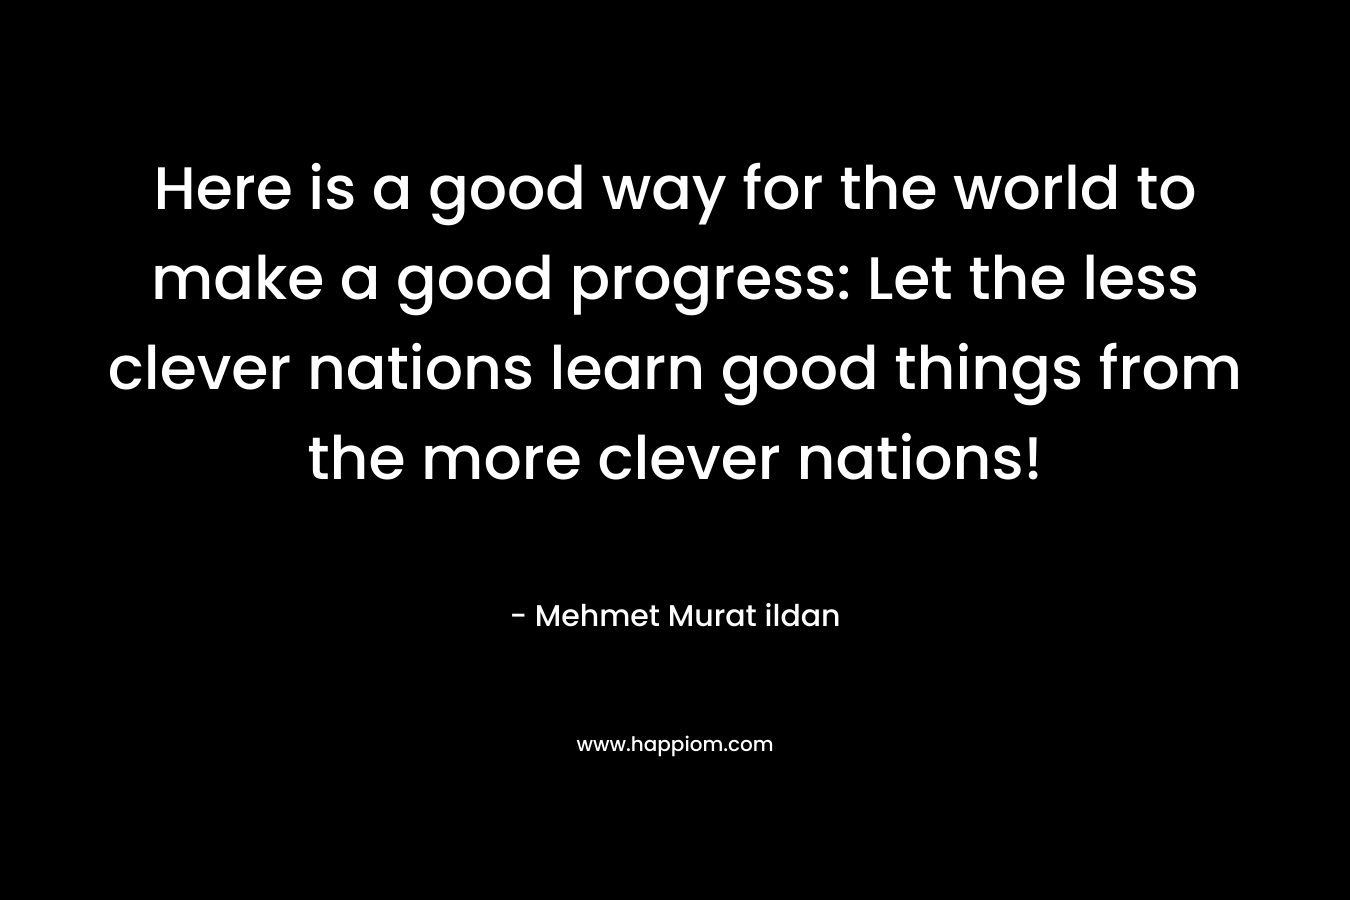 Here is a good way for the world to make a good progress: Let the less clever nations learn good things from the more clever nations!